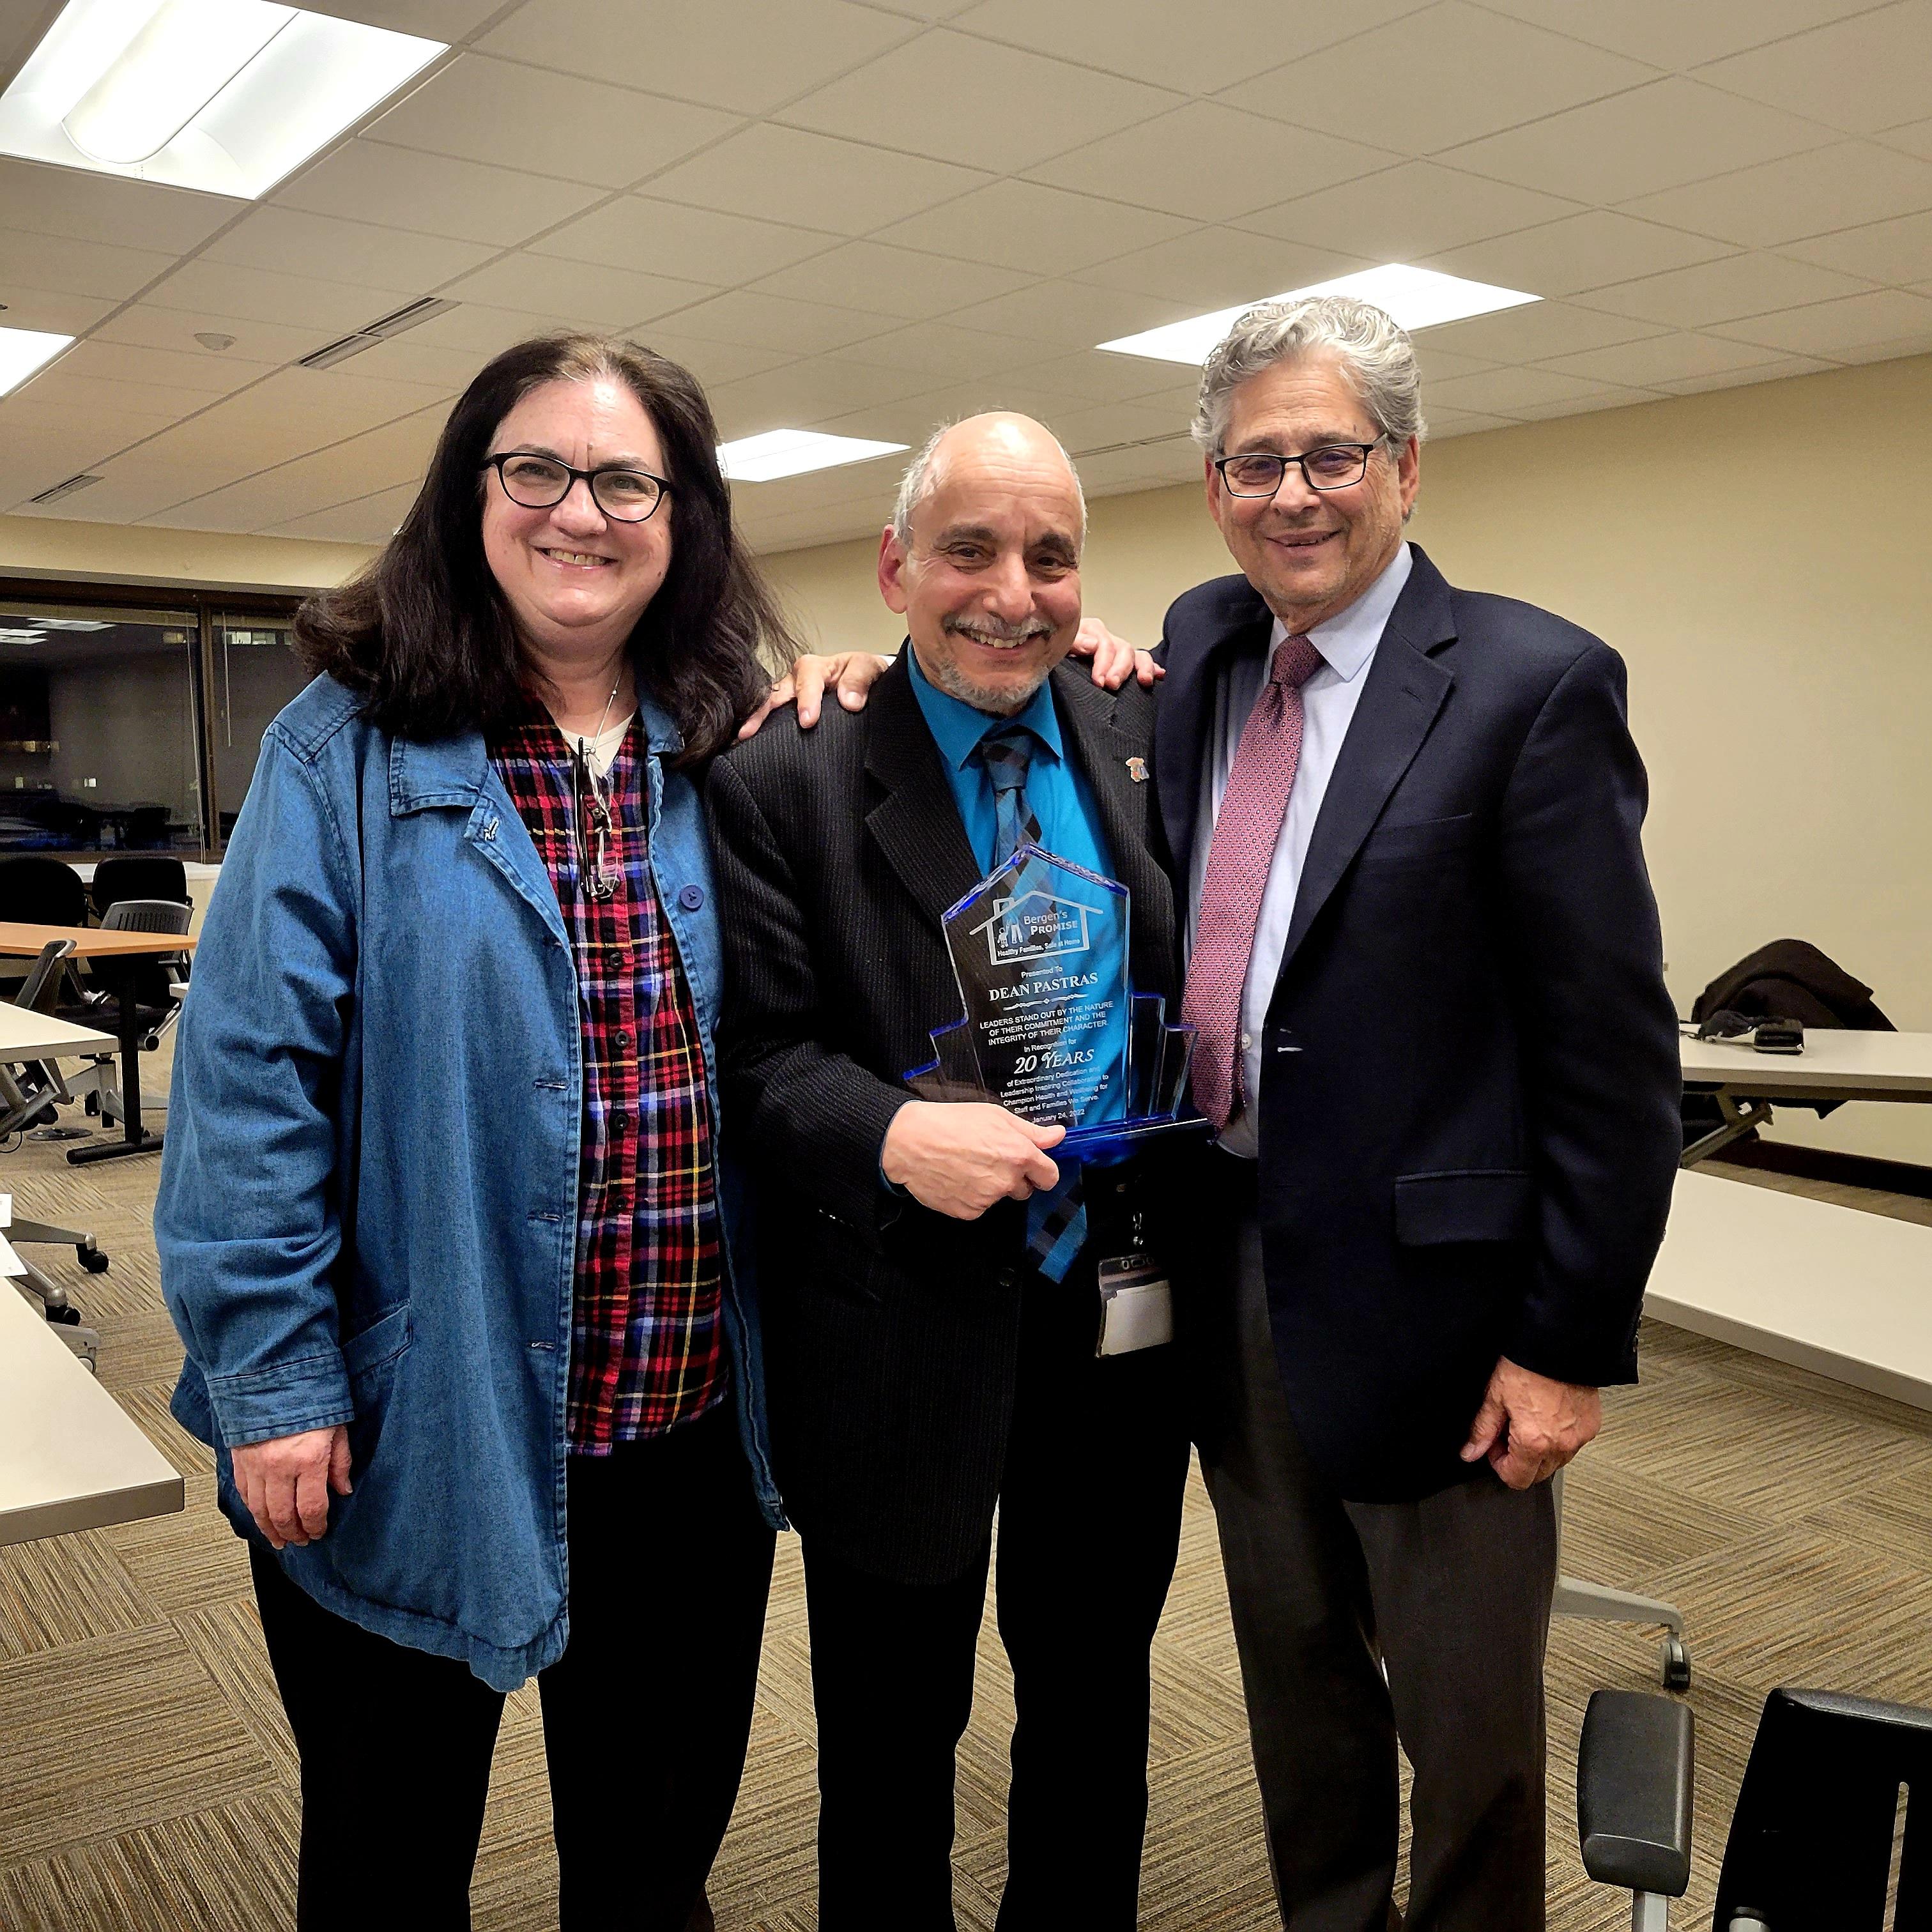 Dean presented with award from Board